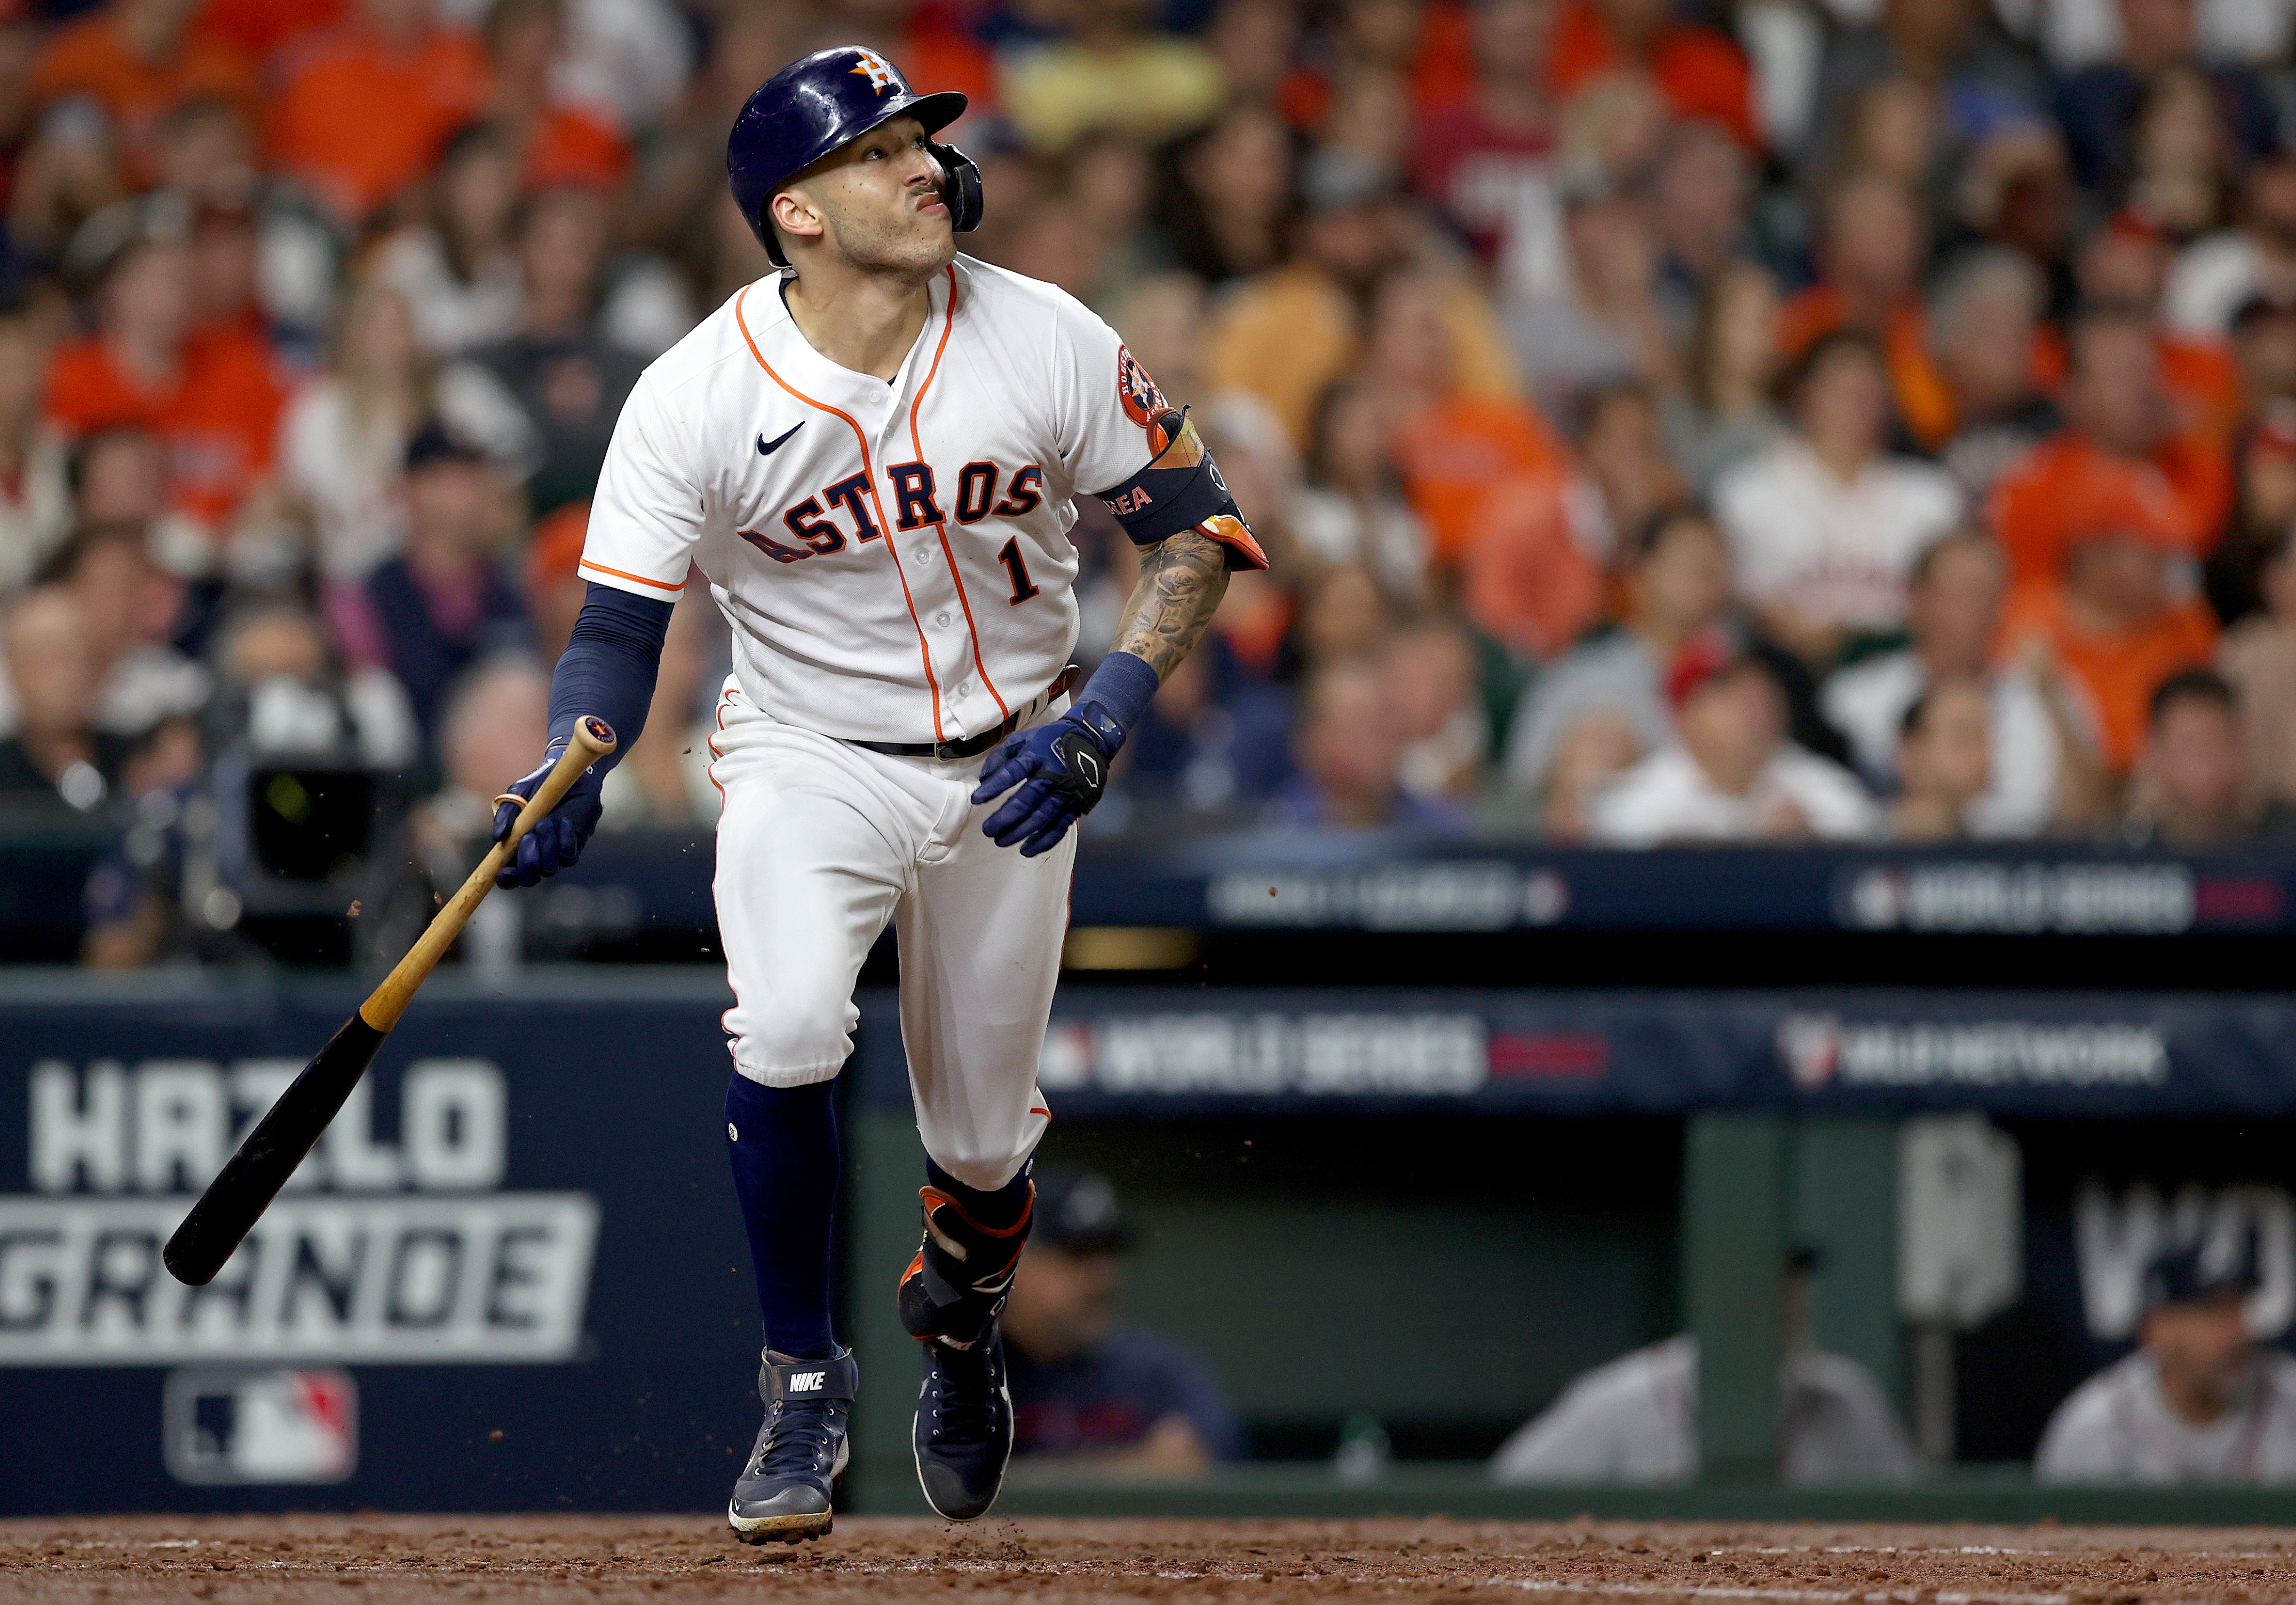 Carlos Correa not in the Astros Opening Day lineup